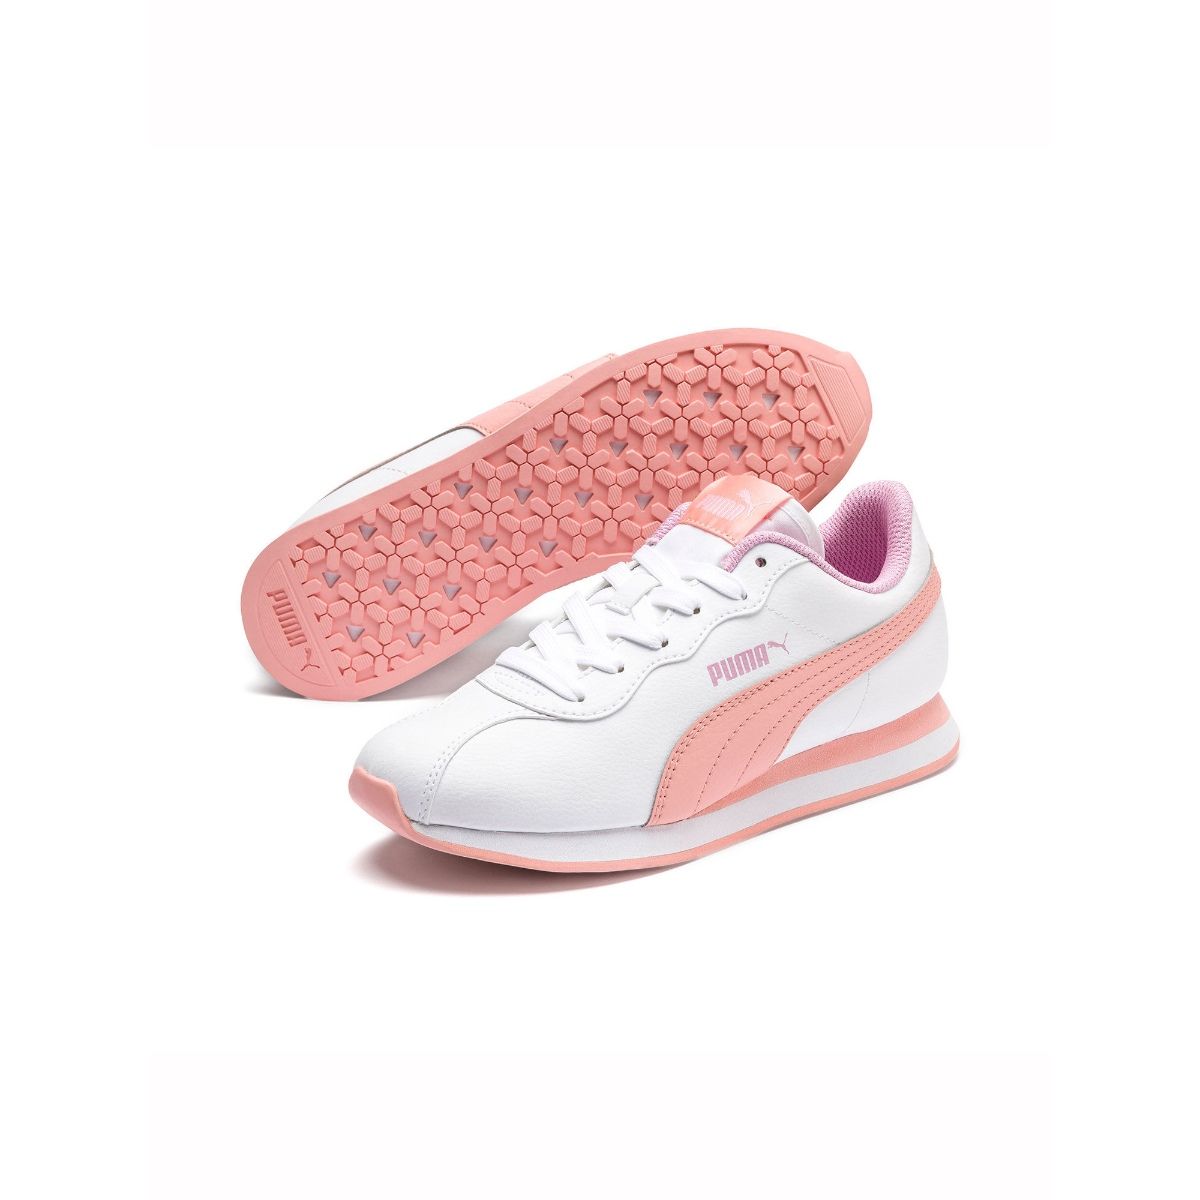 Buy Puma Unisex-Adult Turin 3 Sneaker at Amazon.in